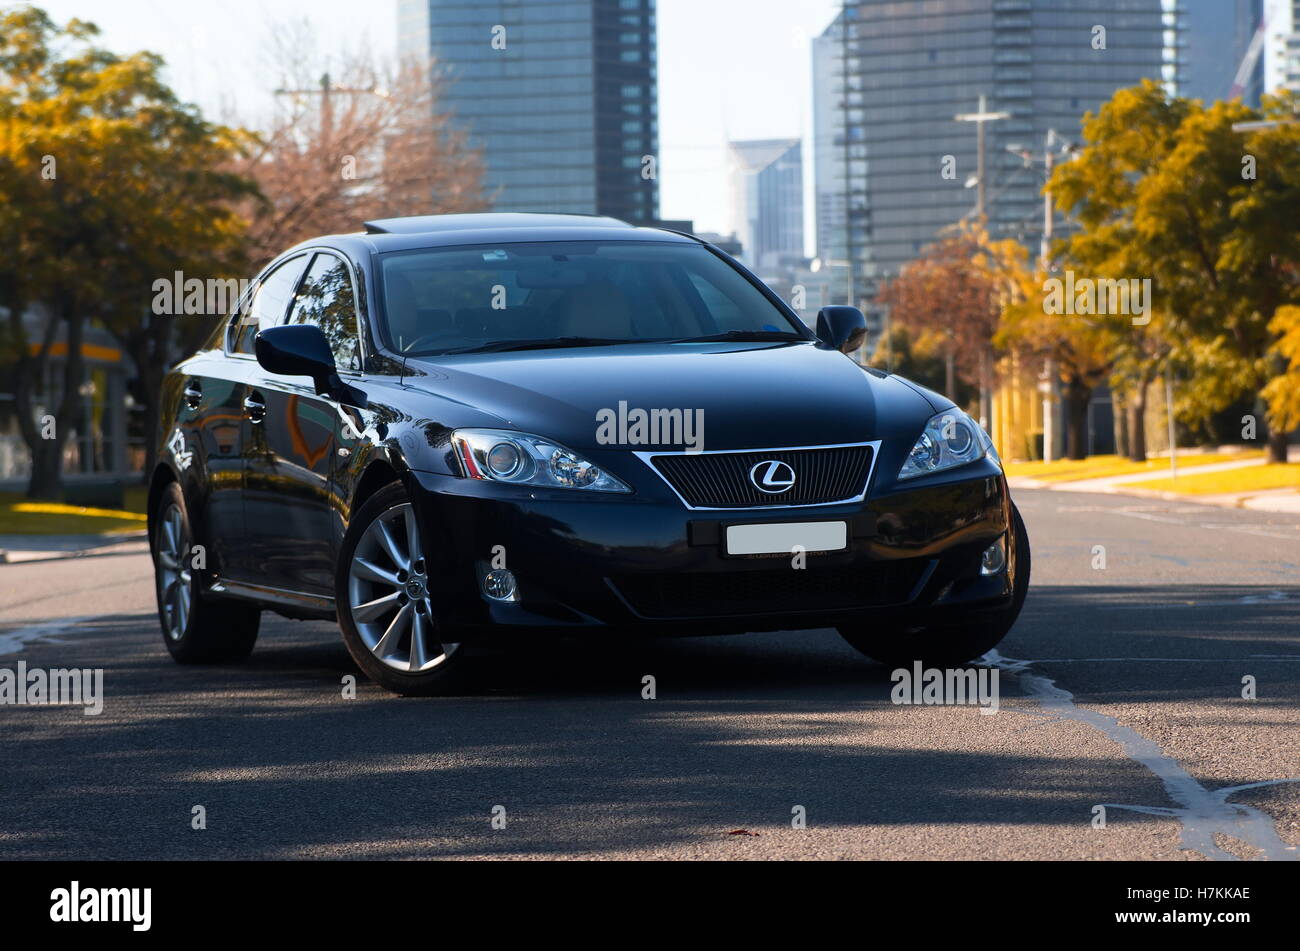 Melbourne Australia May 17 15 Lexus Is250 Model In Test Drive In Stock Photo Alamy